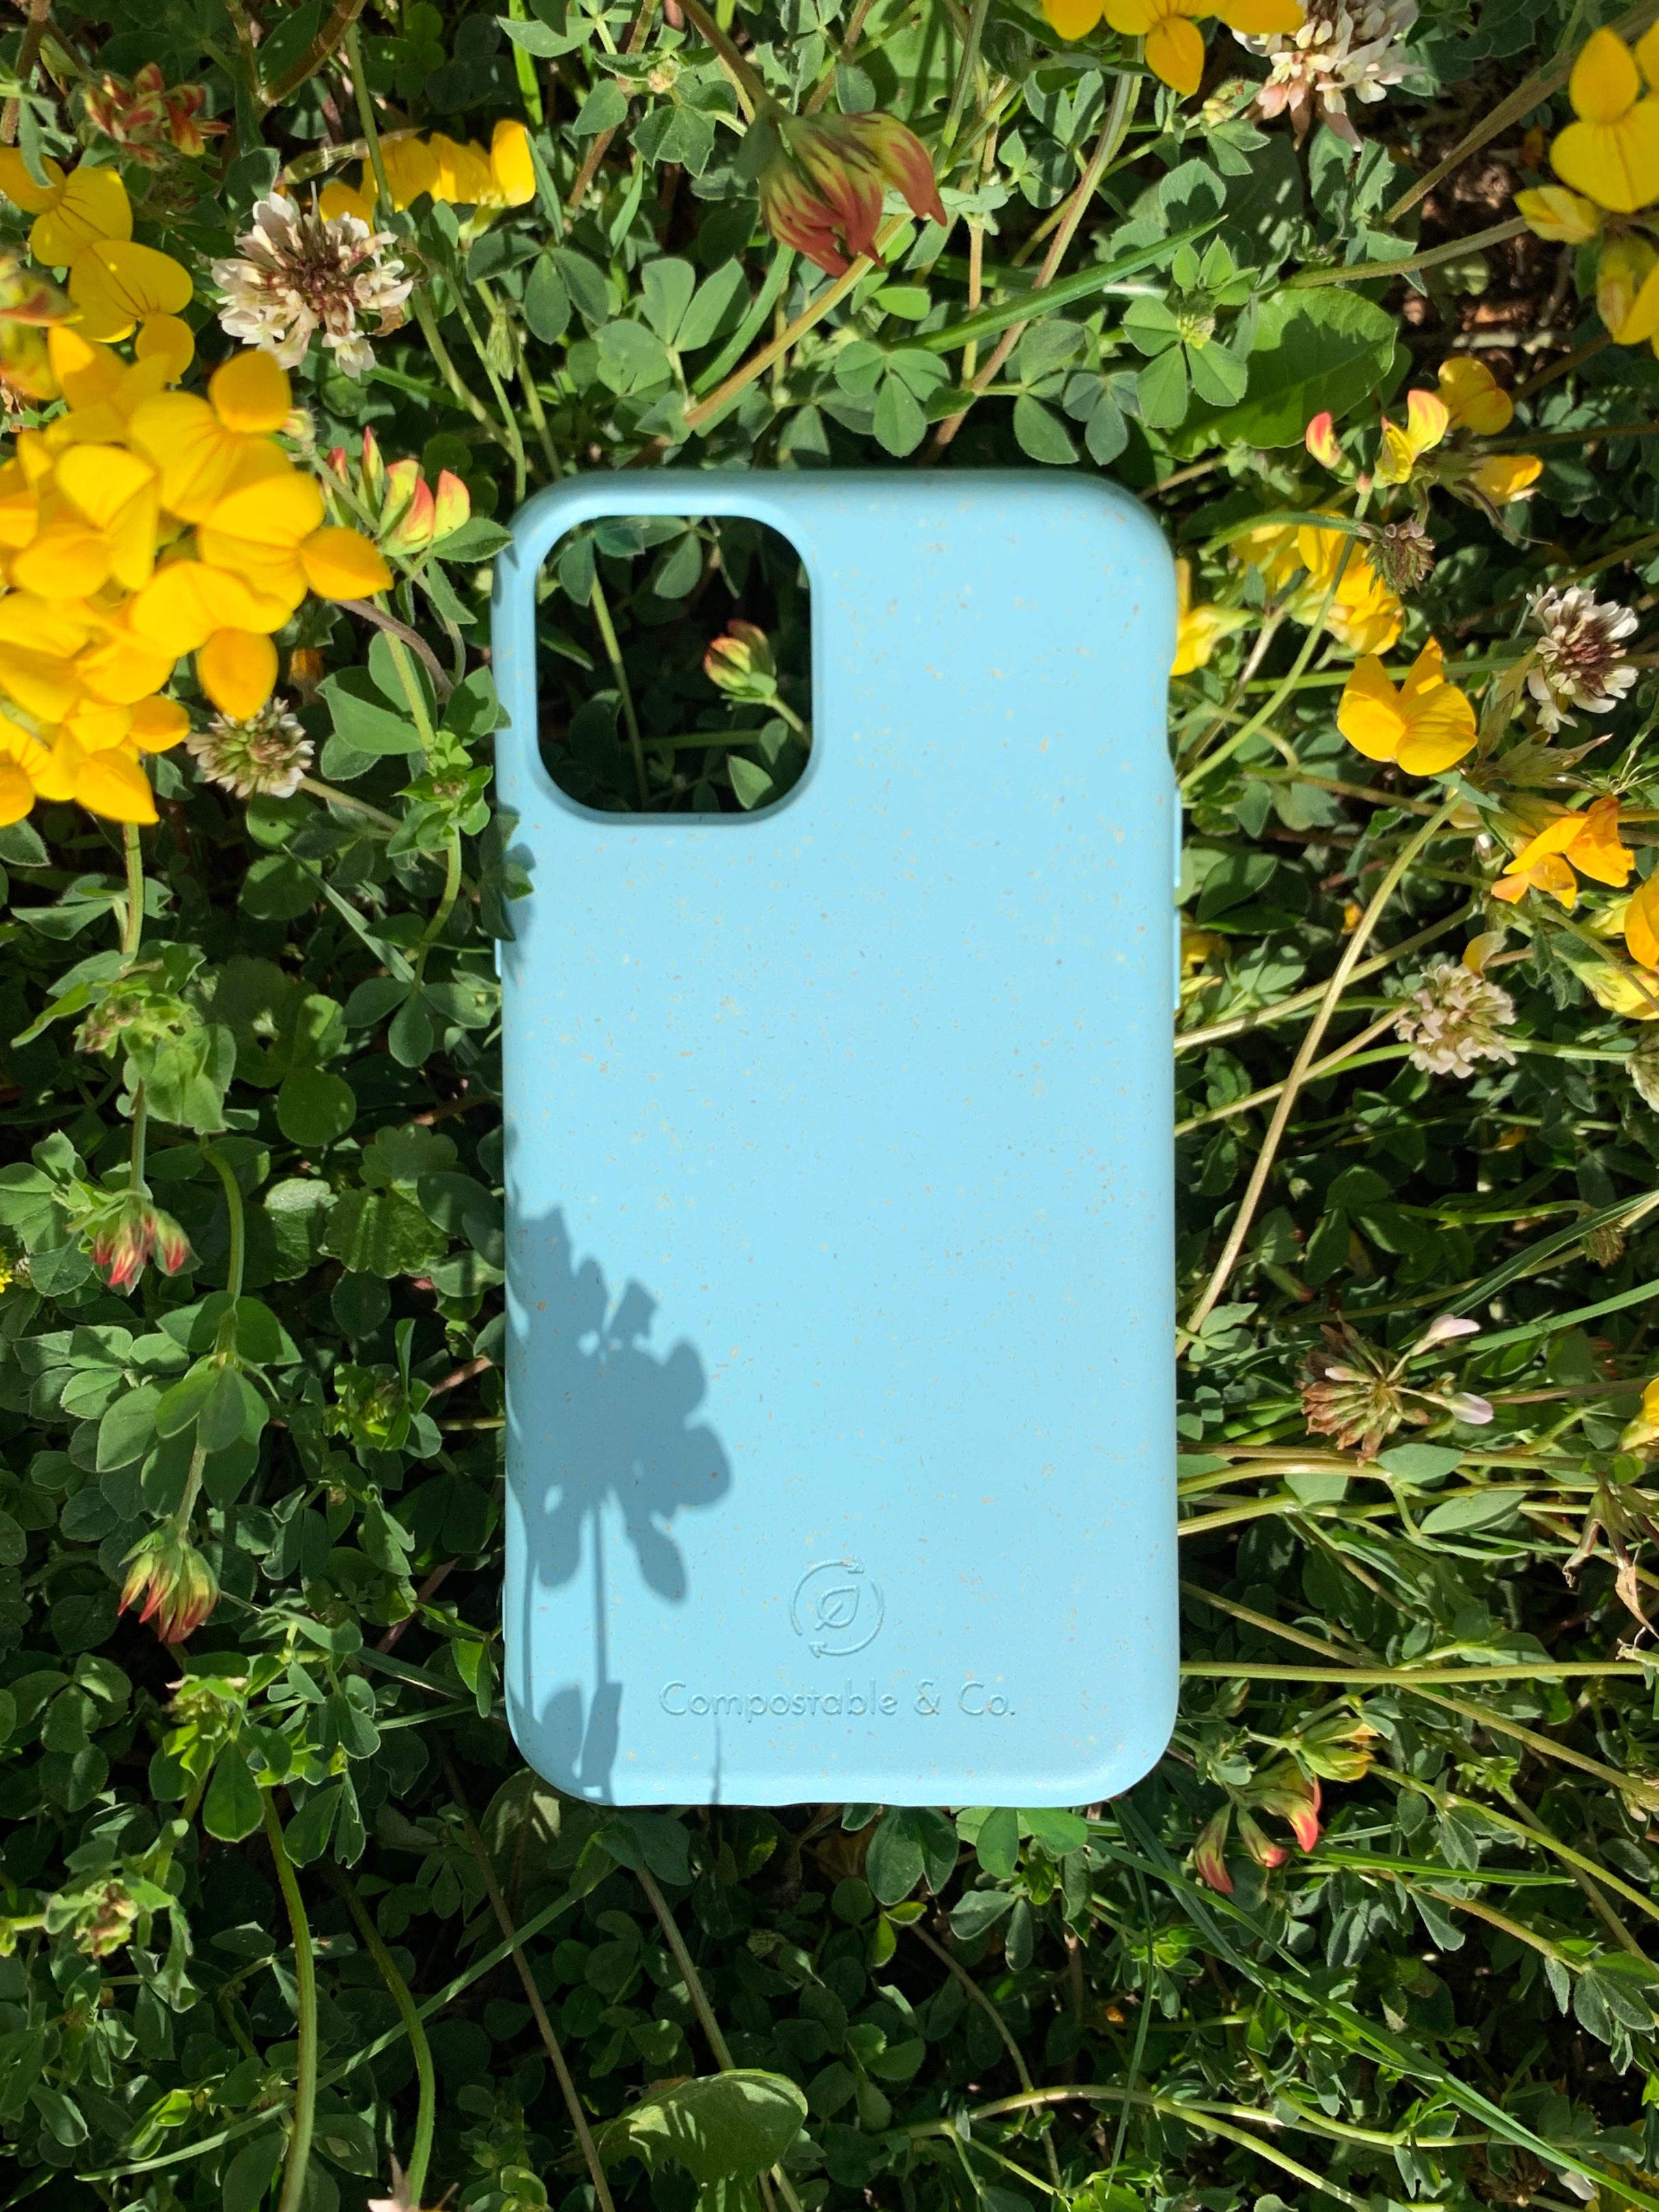 Compostable & Co. iPhone 11 pro max blue biodegradable phone case with natural background